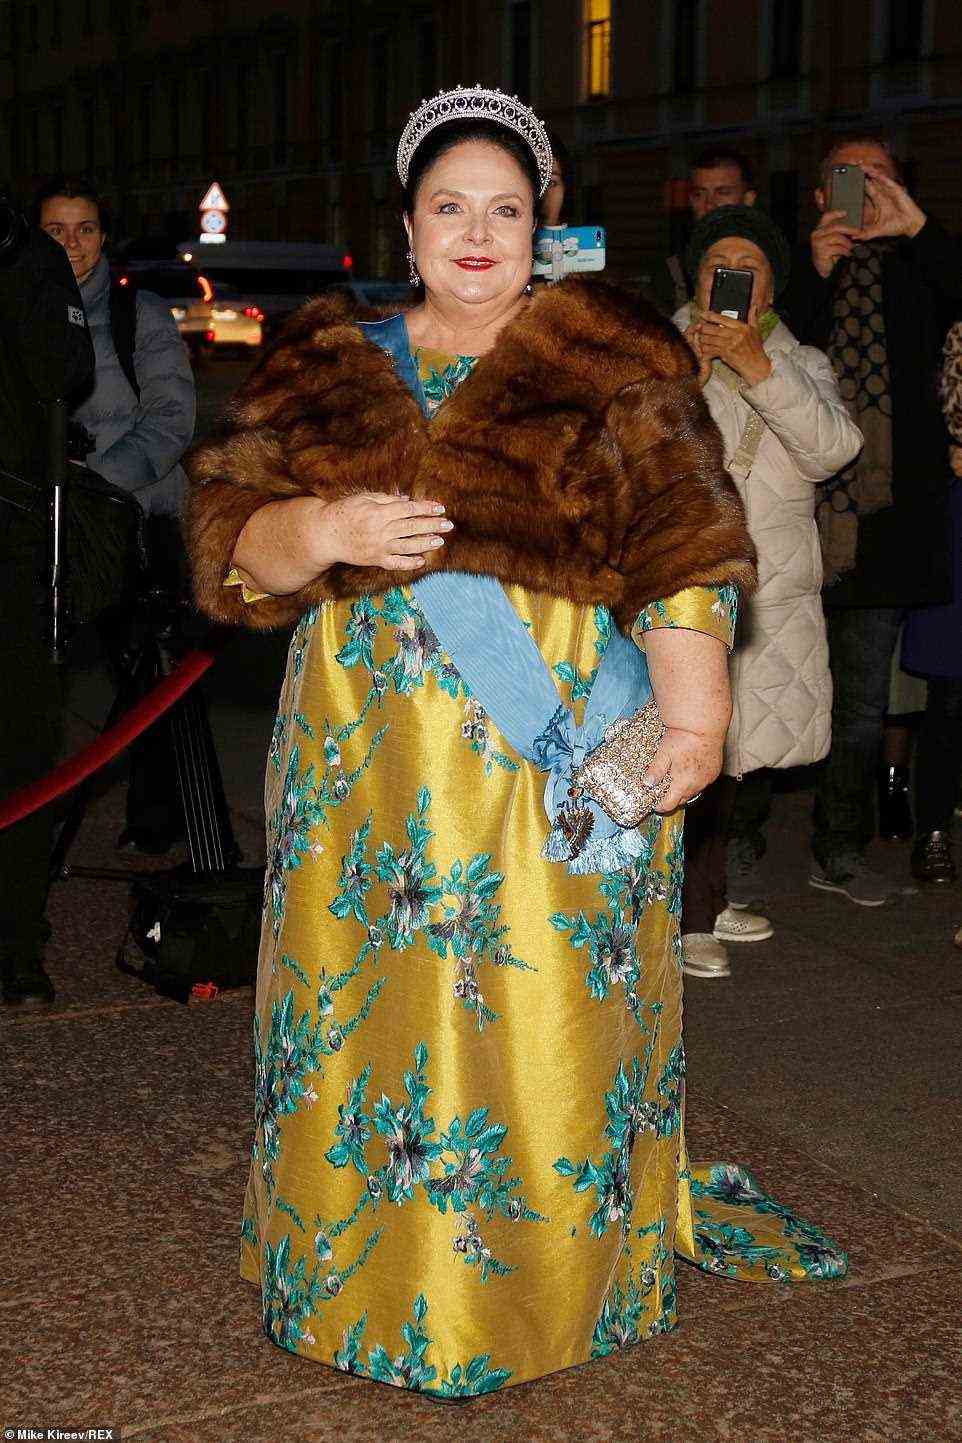 Quick change! After wearing a blue skirt and coat to the religious ceremony, the mother of the groom Duchess Maria Vladimirovna changed into a golden gown with rich floral embroidery and wrapped up in a fur stole for the evening festivities